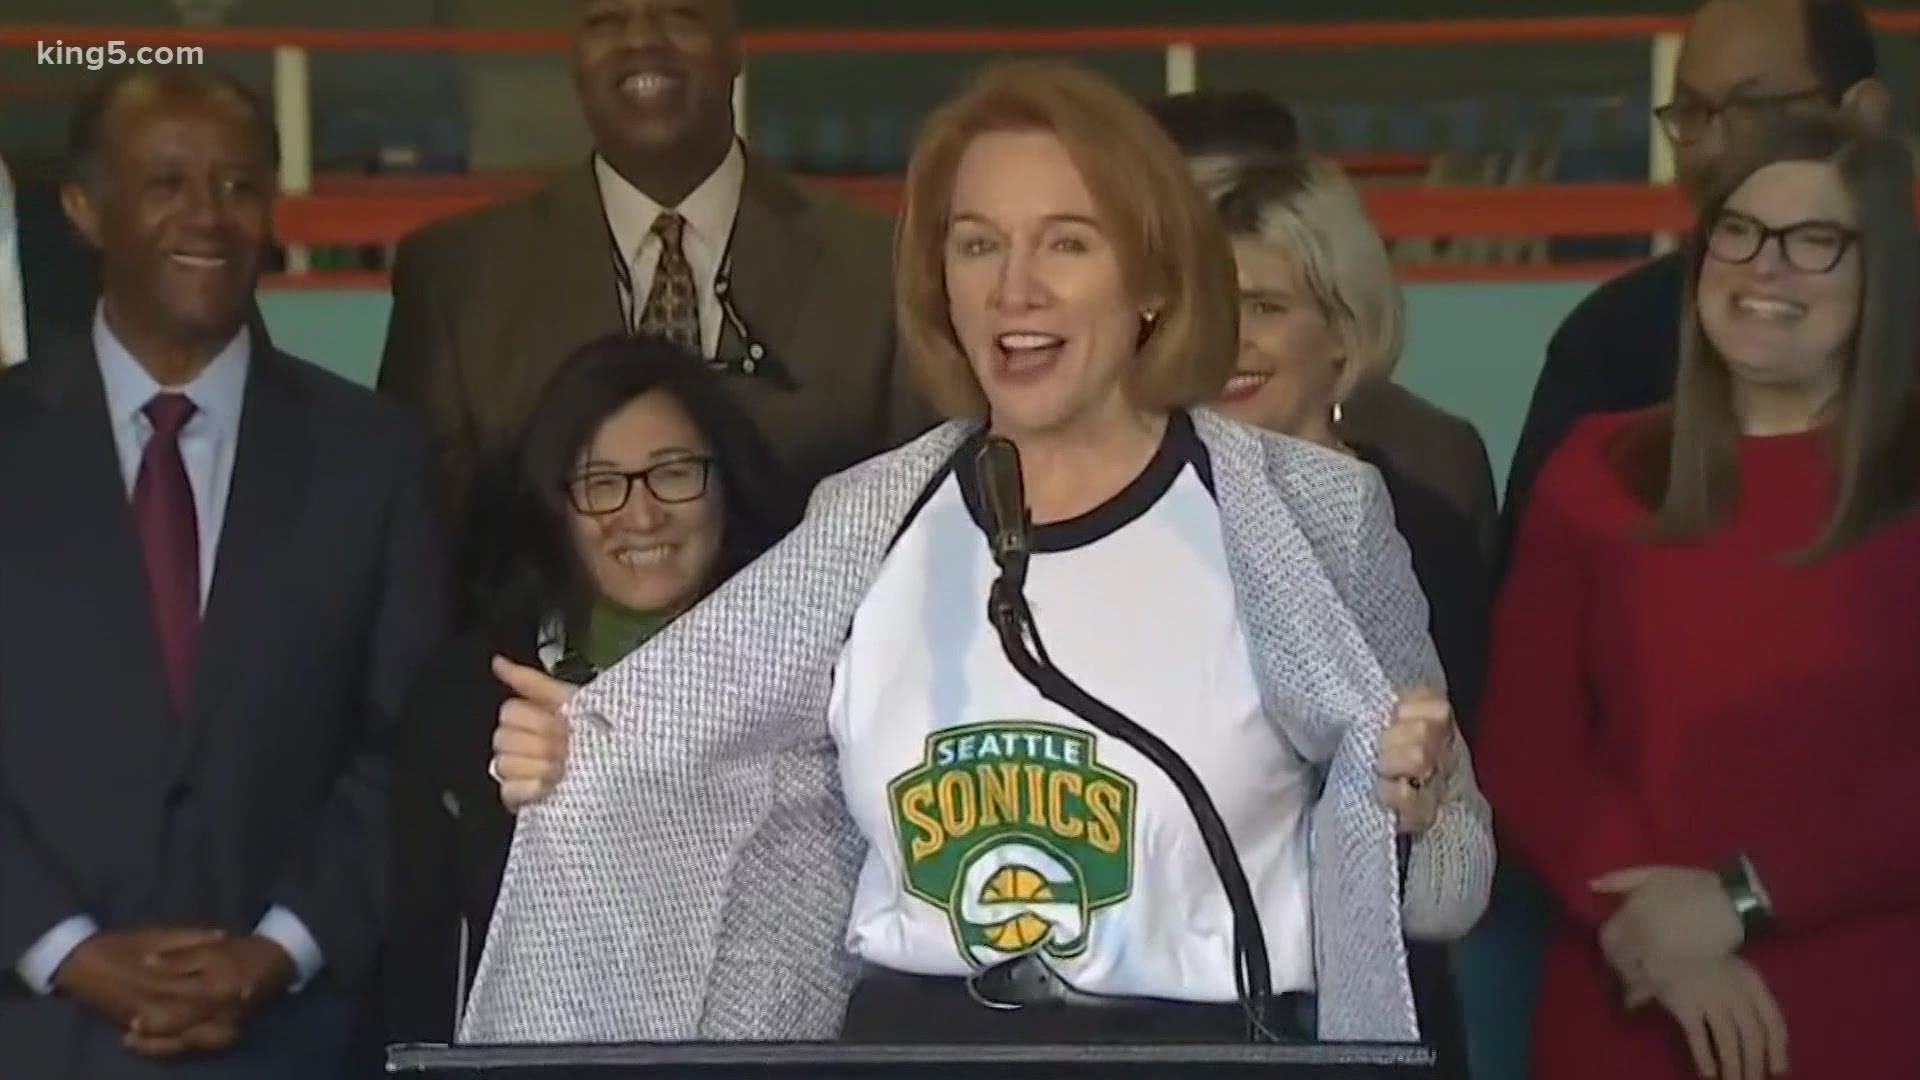 Could Seattle see a return of NBA basketball? Seattle Mayor Jenny Durkan is feeling good about it, now the rest of the country is buzzing.